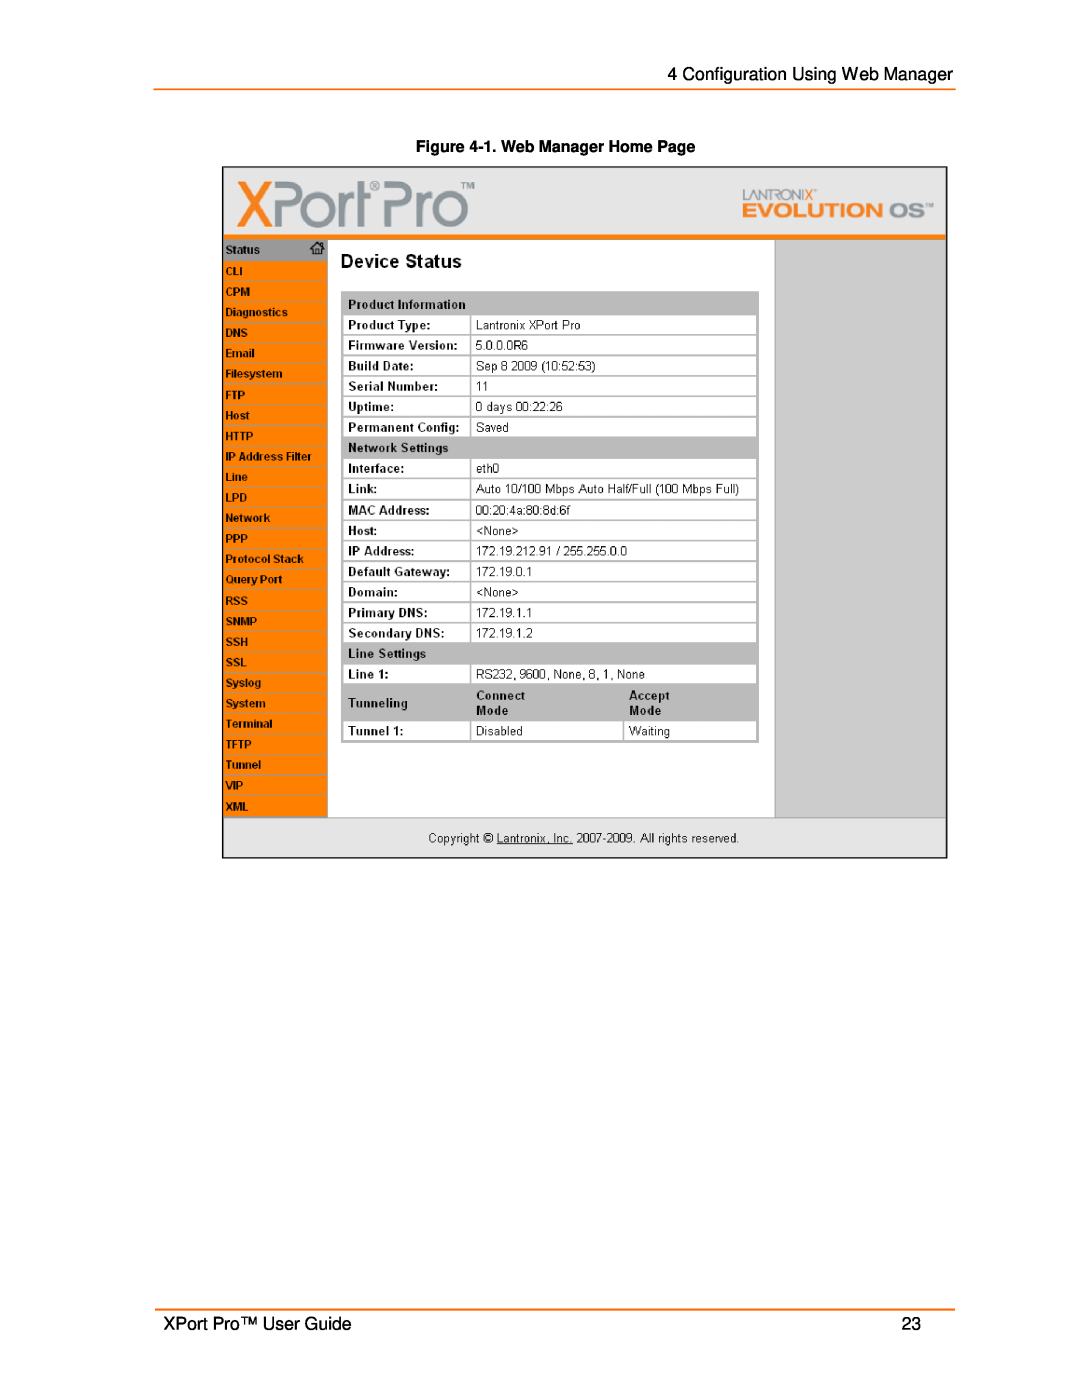 Lantronix 900-560 manual Configuration Using Web Manager, XPort Pro User Guide, 1. Web Manager Home Page 